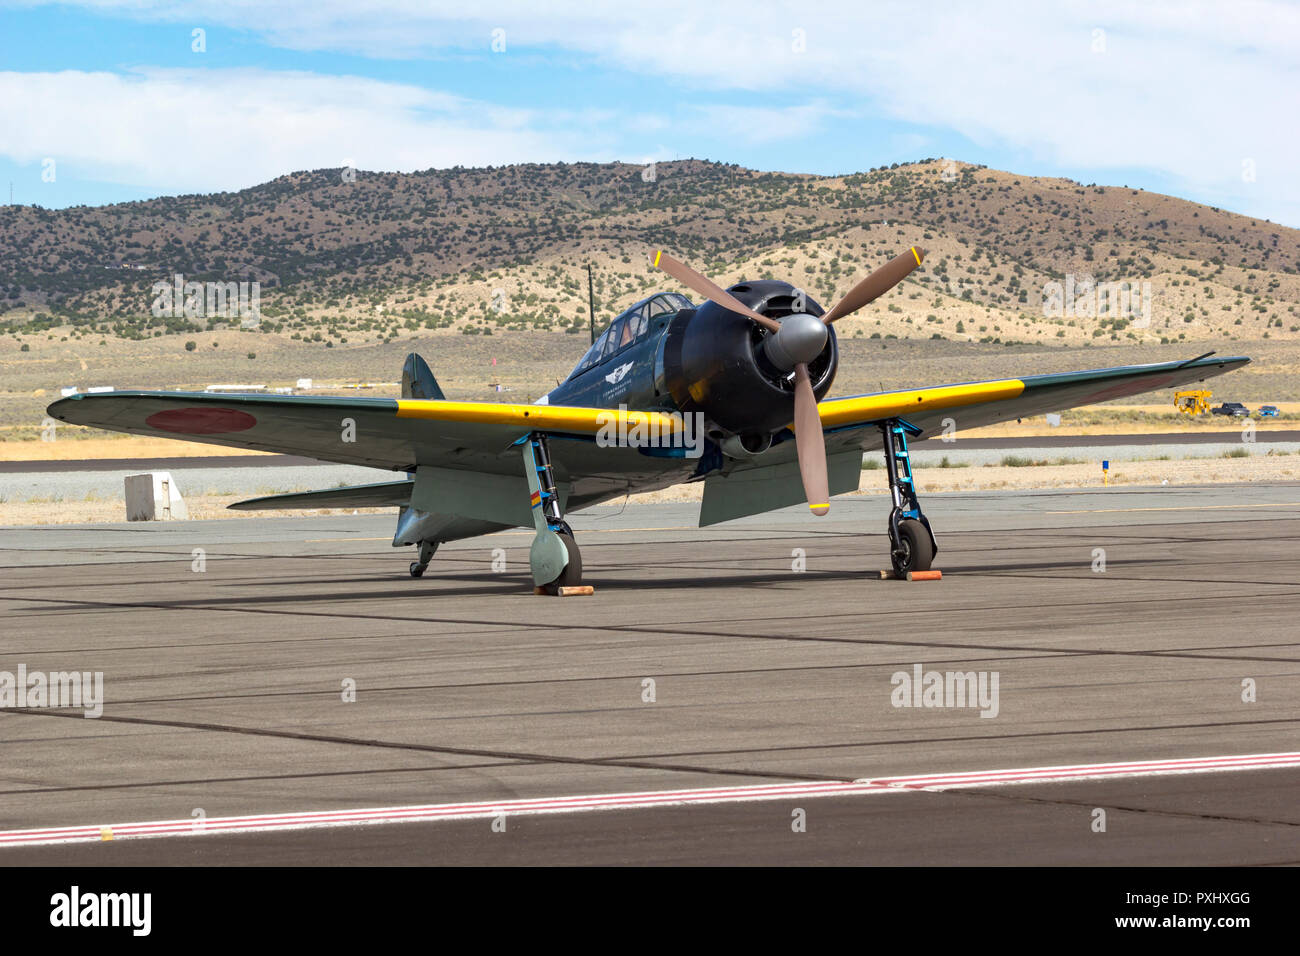 Japanese A6M3 Model 22 Zero fighter sits on the ramp at Reno Stead Airport near Reno, Nevada. Stock Photo